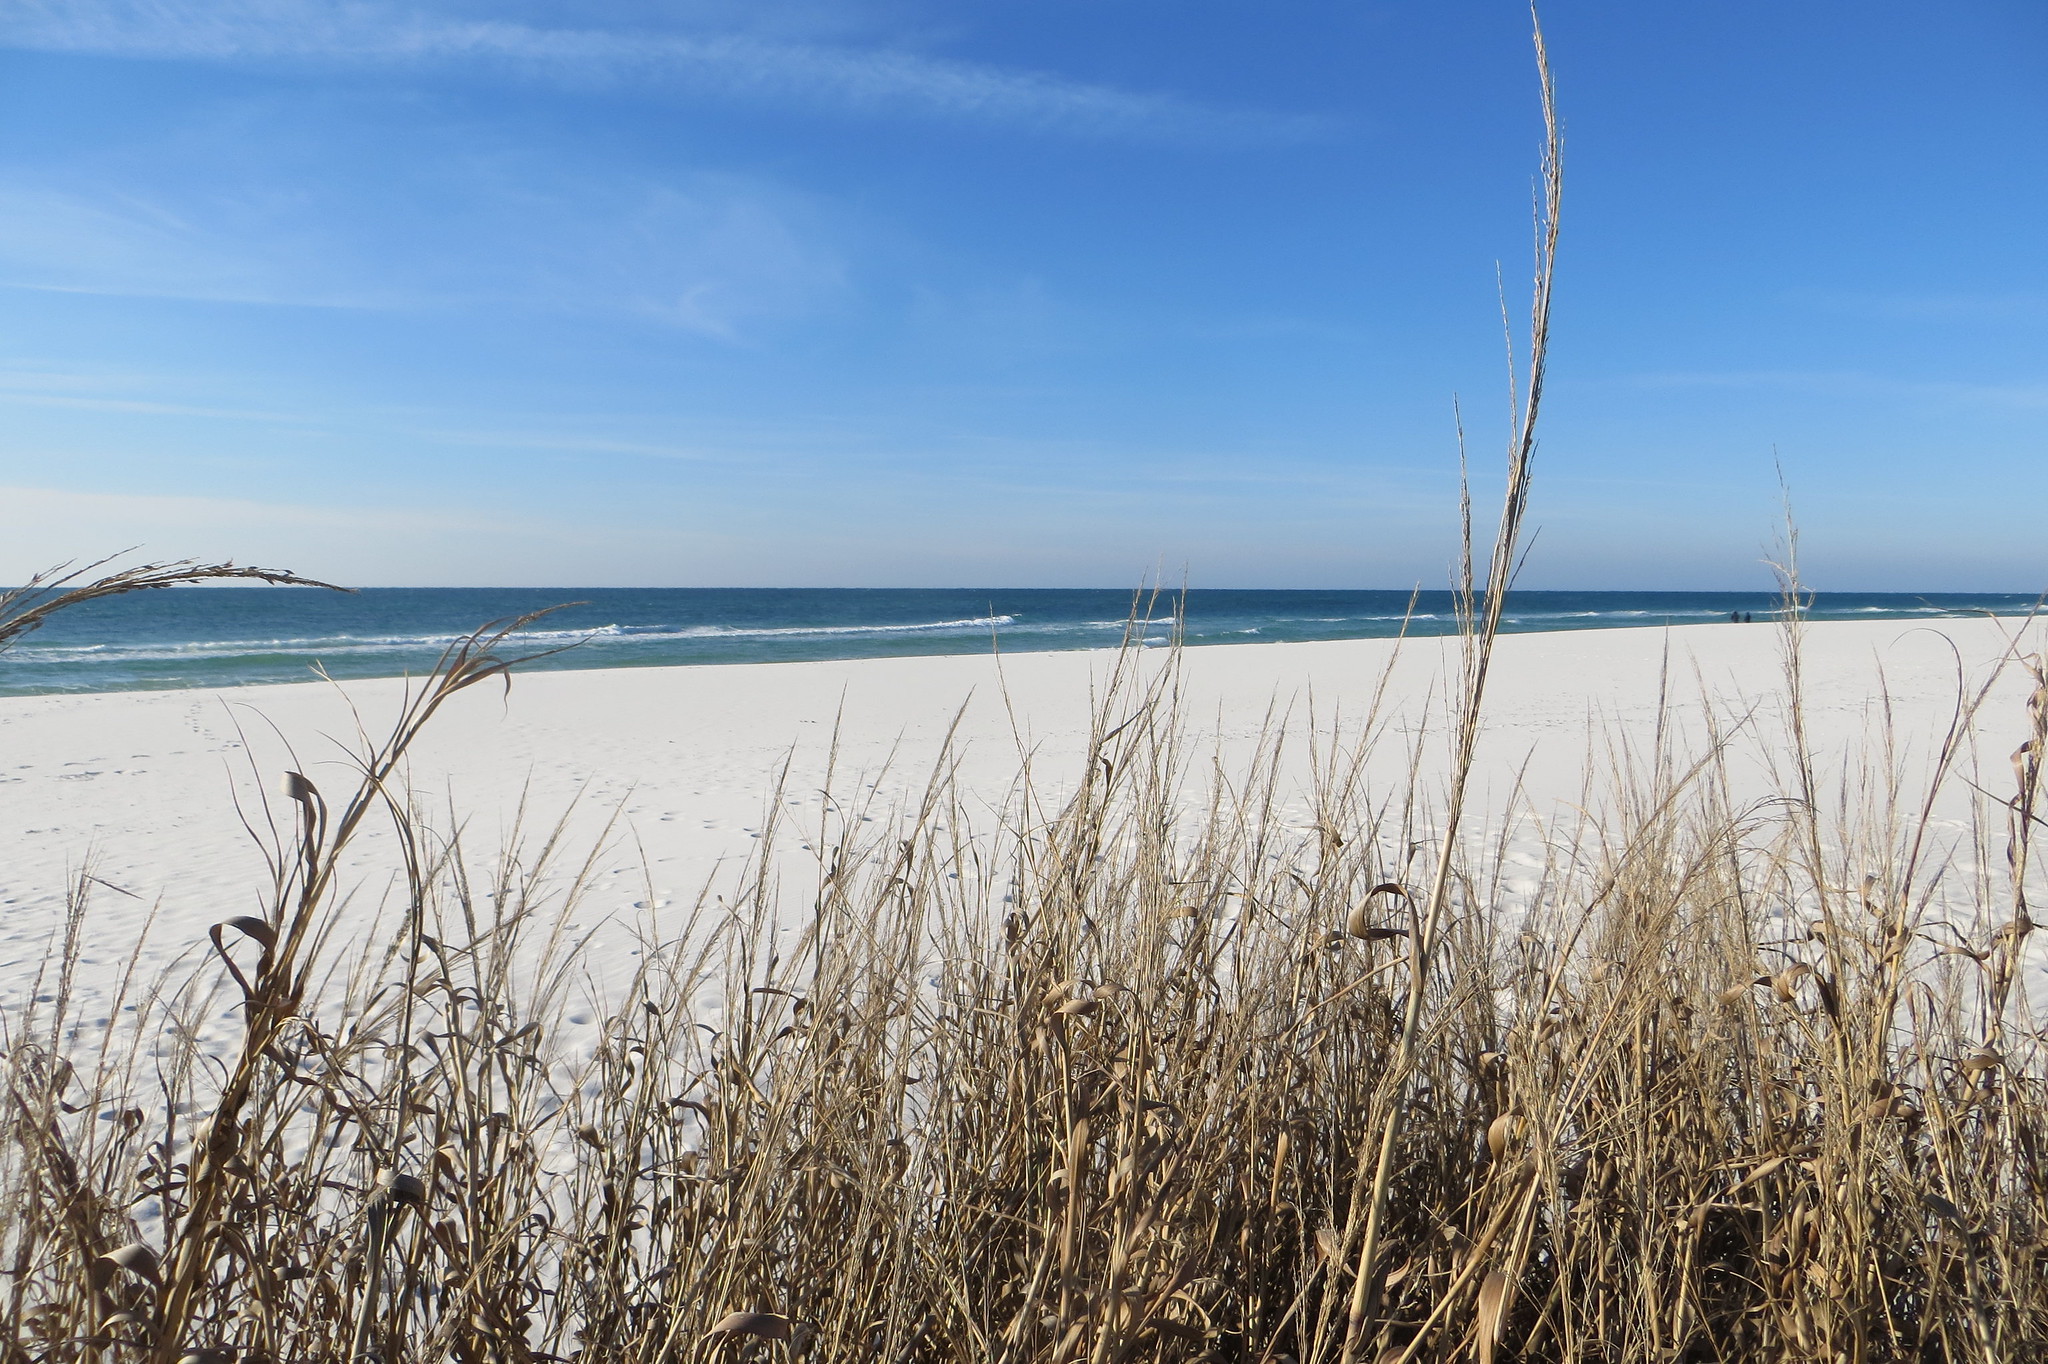 <p>Many of the beaches are part of the Gulf Island National Seashore, so they’re protected against widespread development. Because of that, visiting these beaches is a great chance to see natural, untouched seashore.</p>